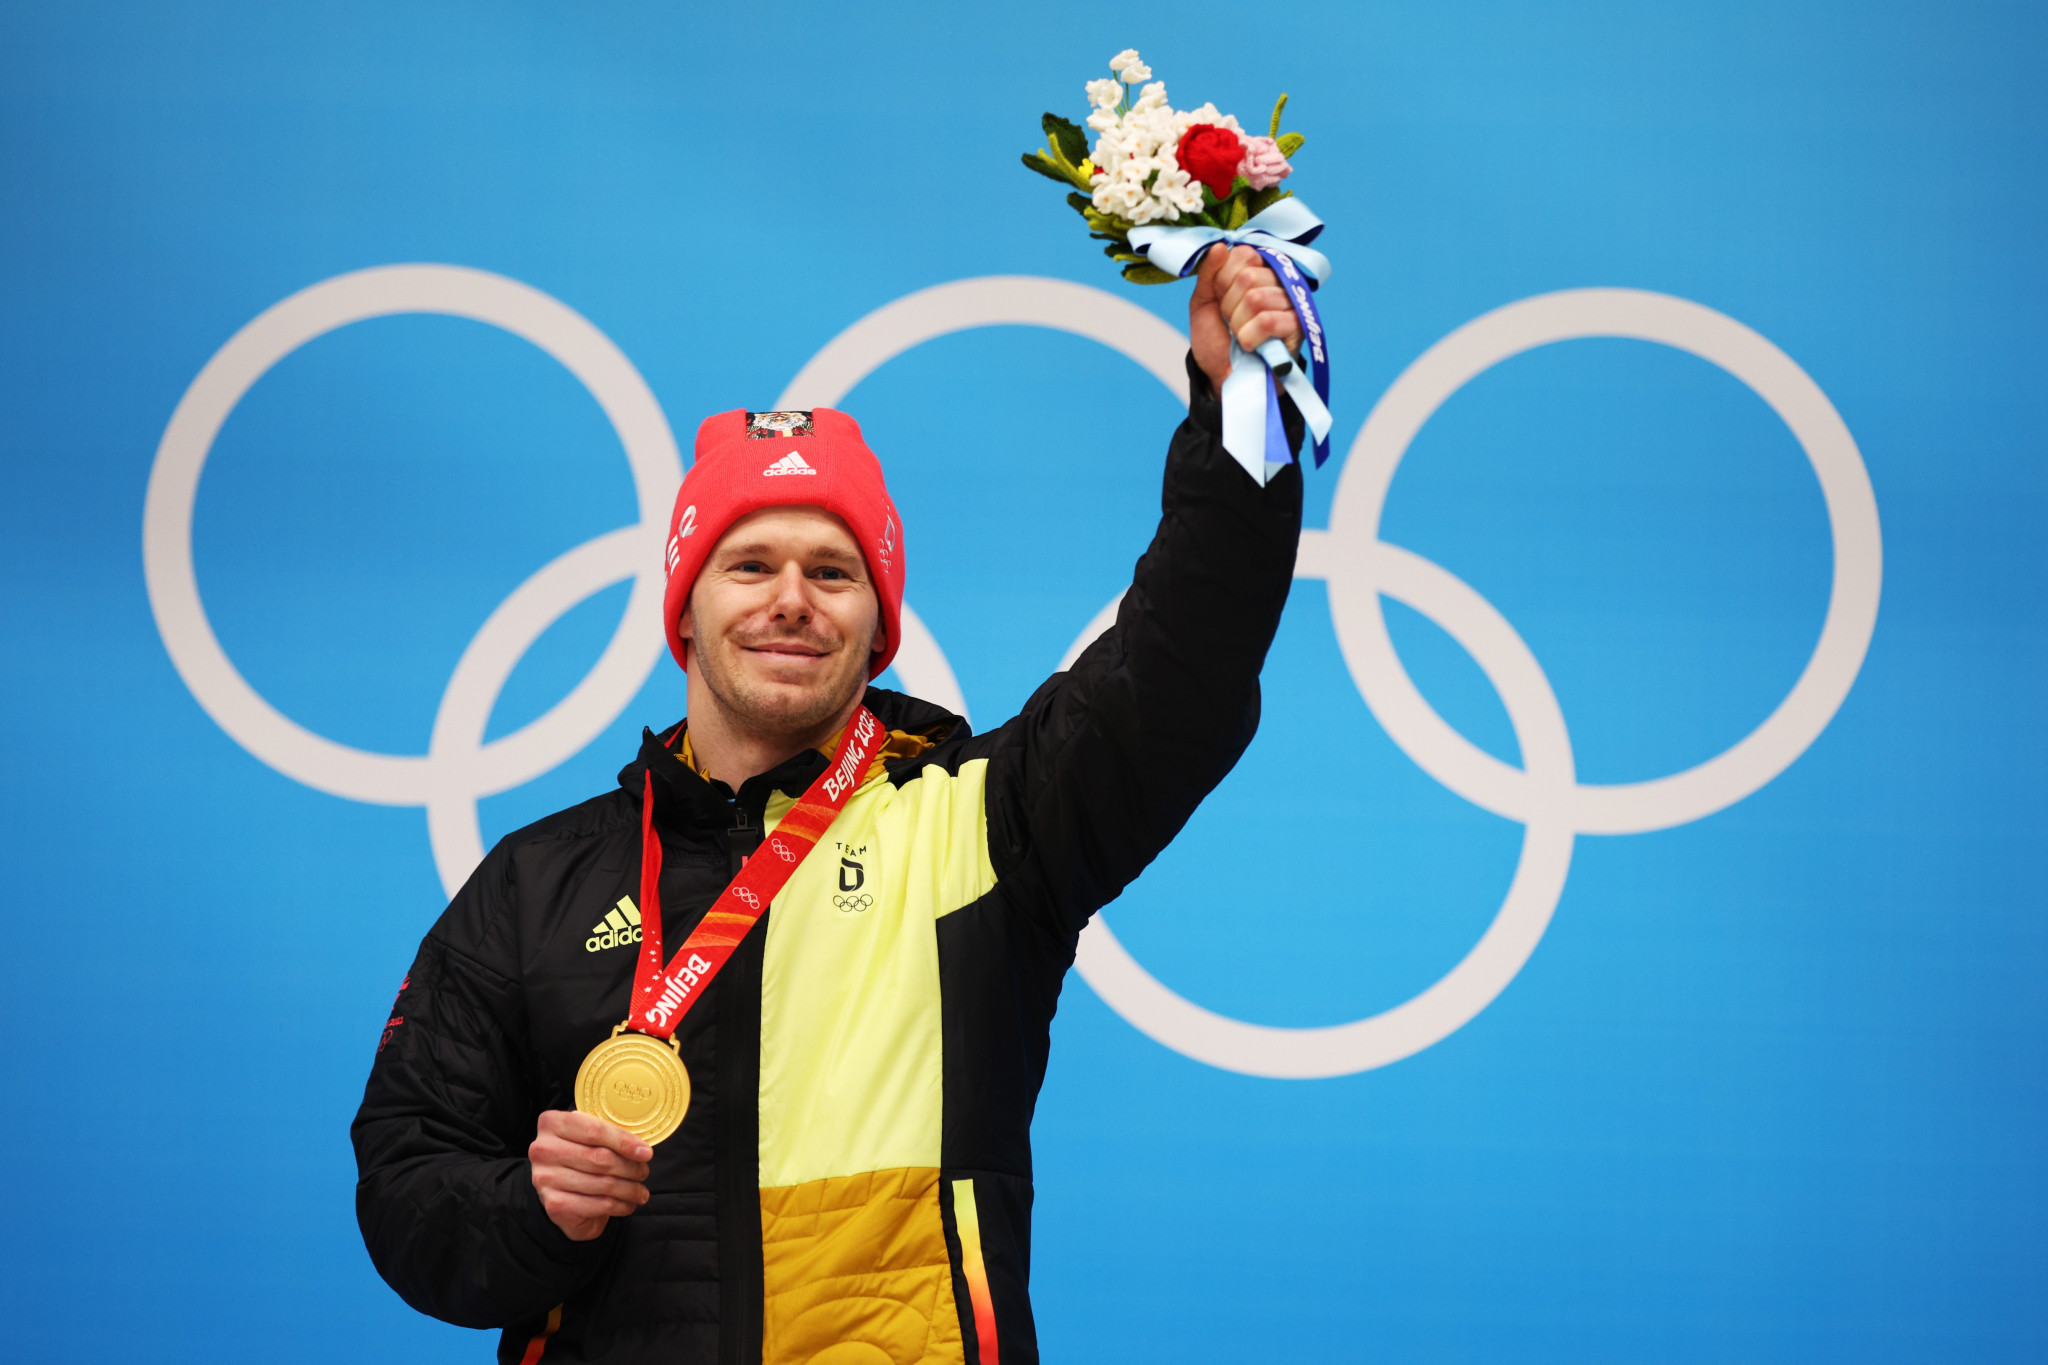 Christopher Grotheer earned gold in the men's skeleton event ©Getty Images